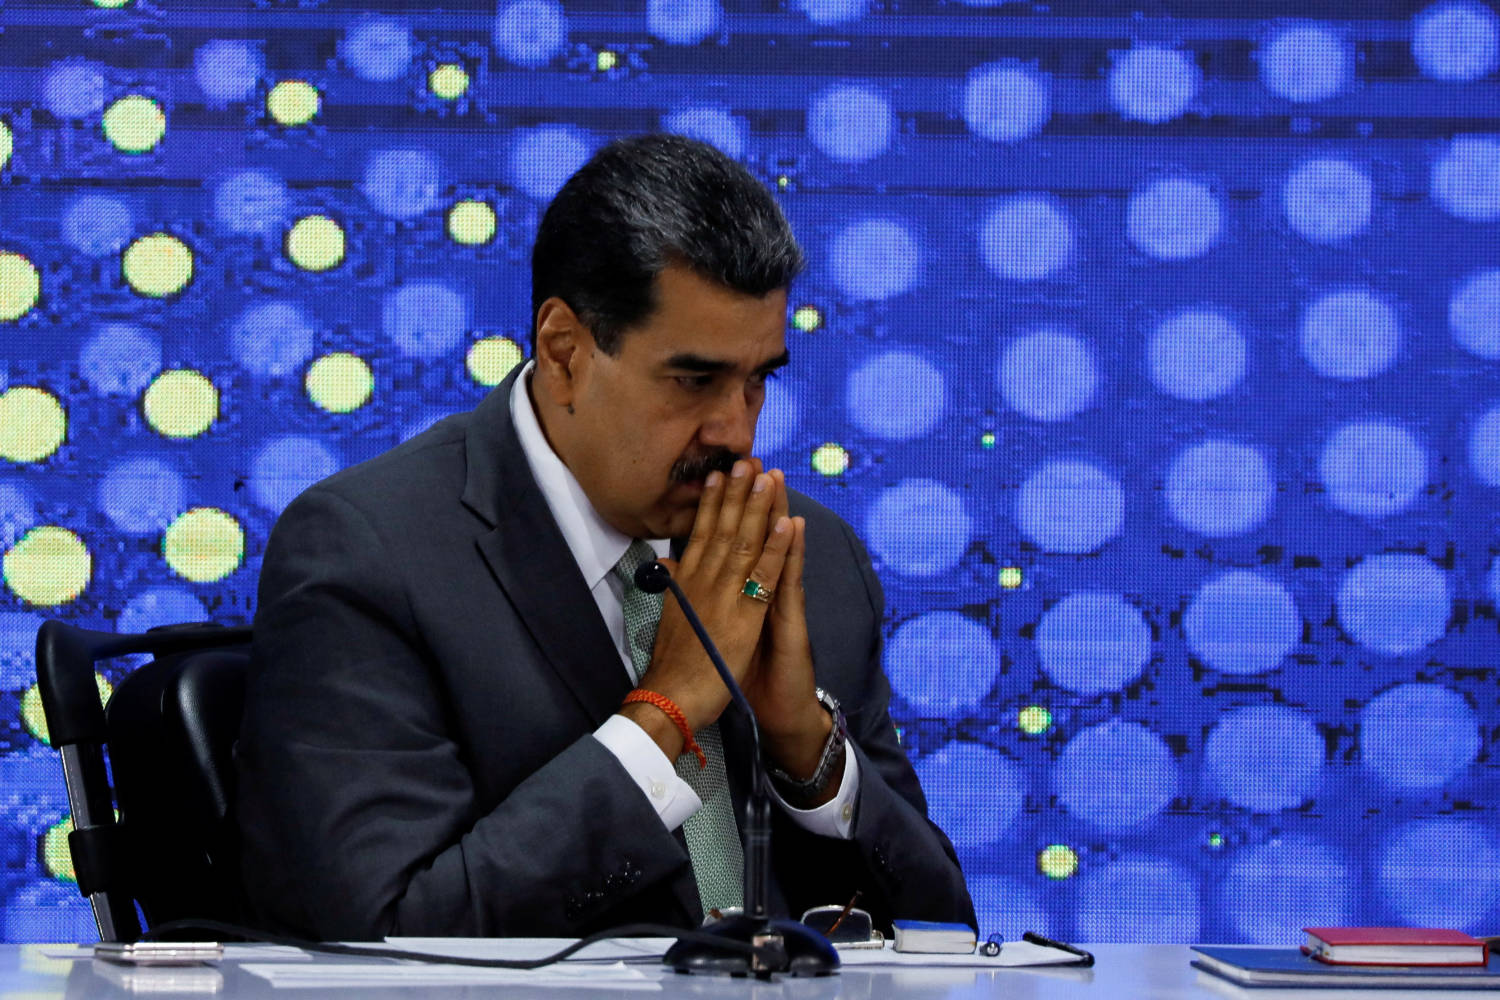 File Photo: Venezuelan President Nicolas Maduro Attends An Event At The National Electoral Council, In Caracas